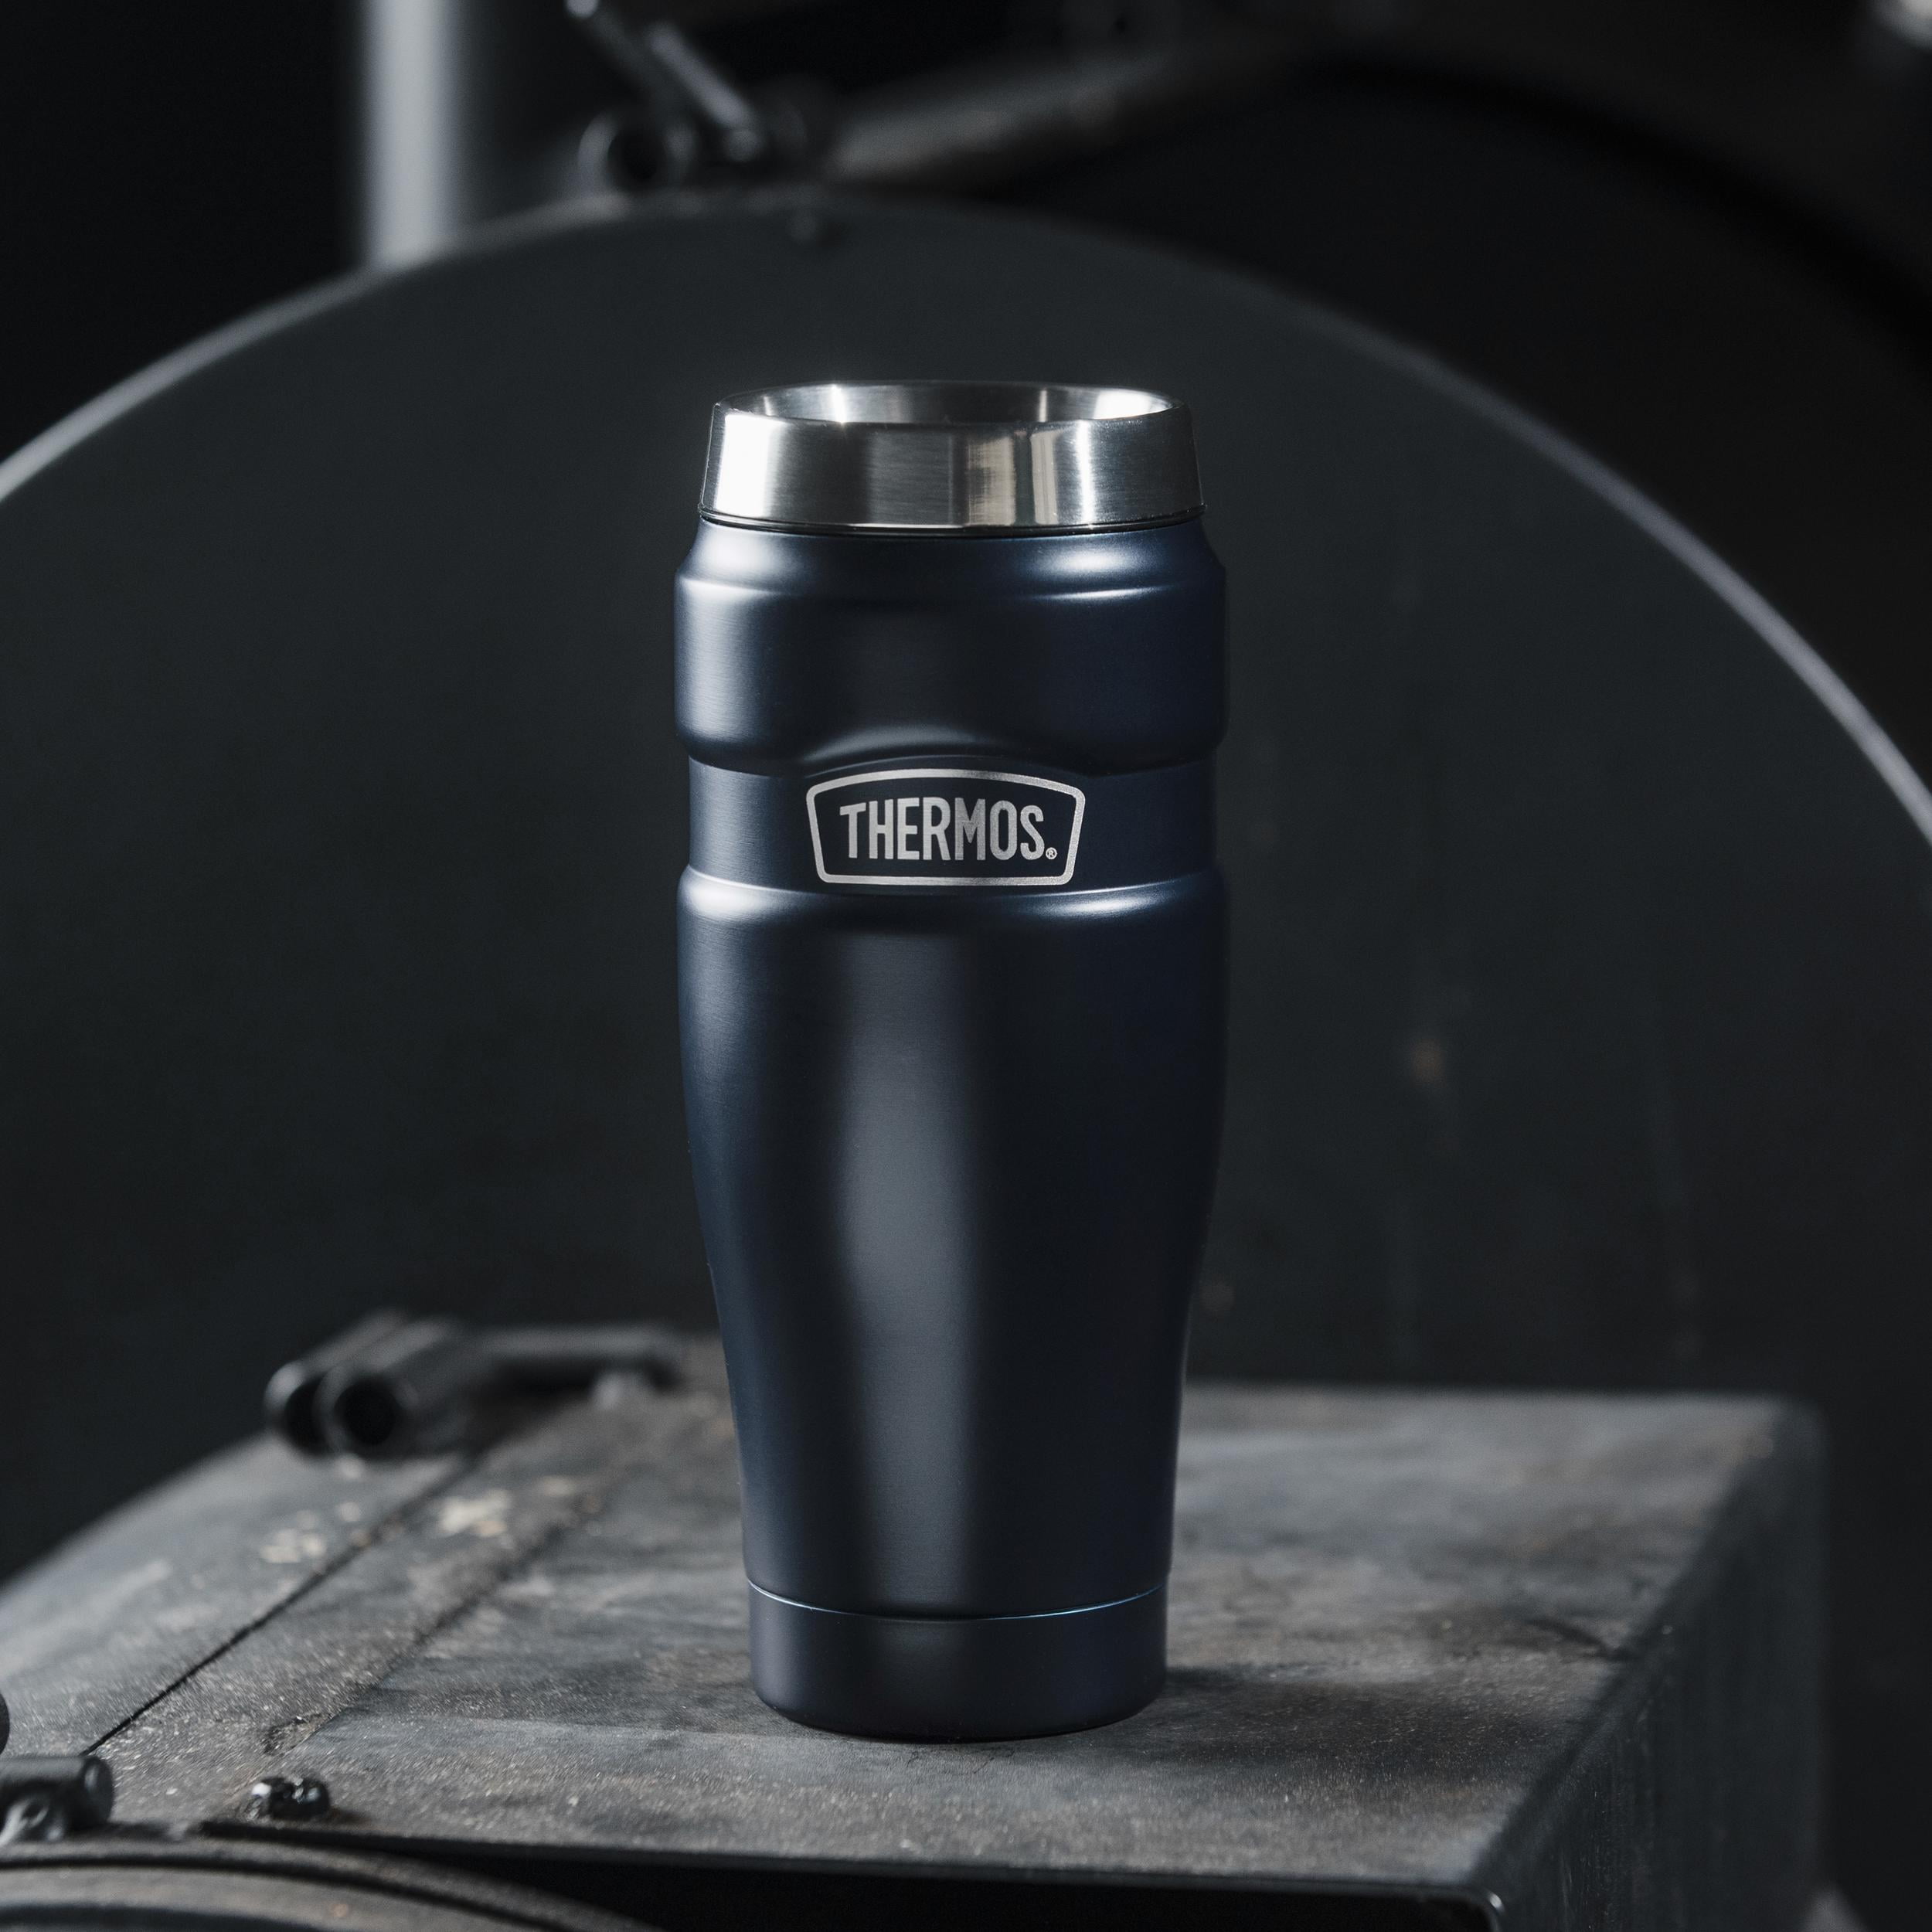 Thermos Thermos 16 ounce vacuum insulated travel mug black, 8  Ounce, Silver (NS100BK004): Glassware & Drinkware